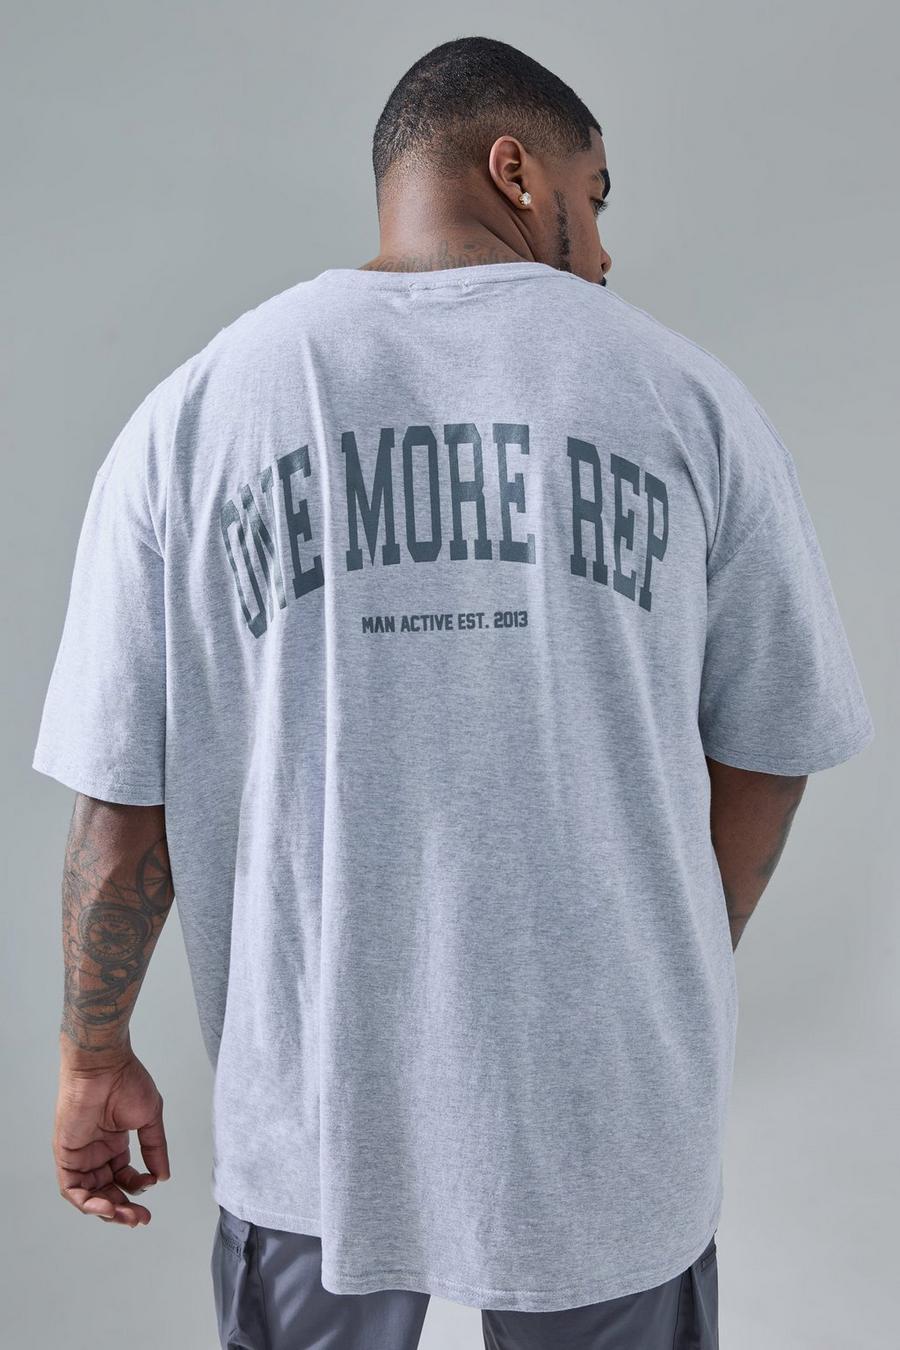 Grey marl Plus Man Active Oversized One More Rep T-shirt